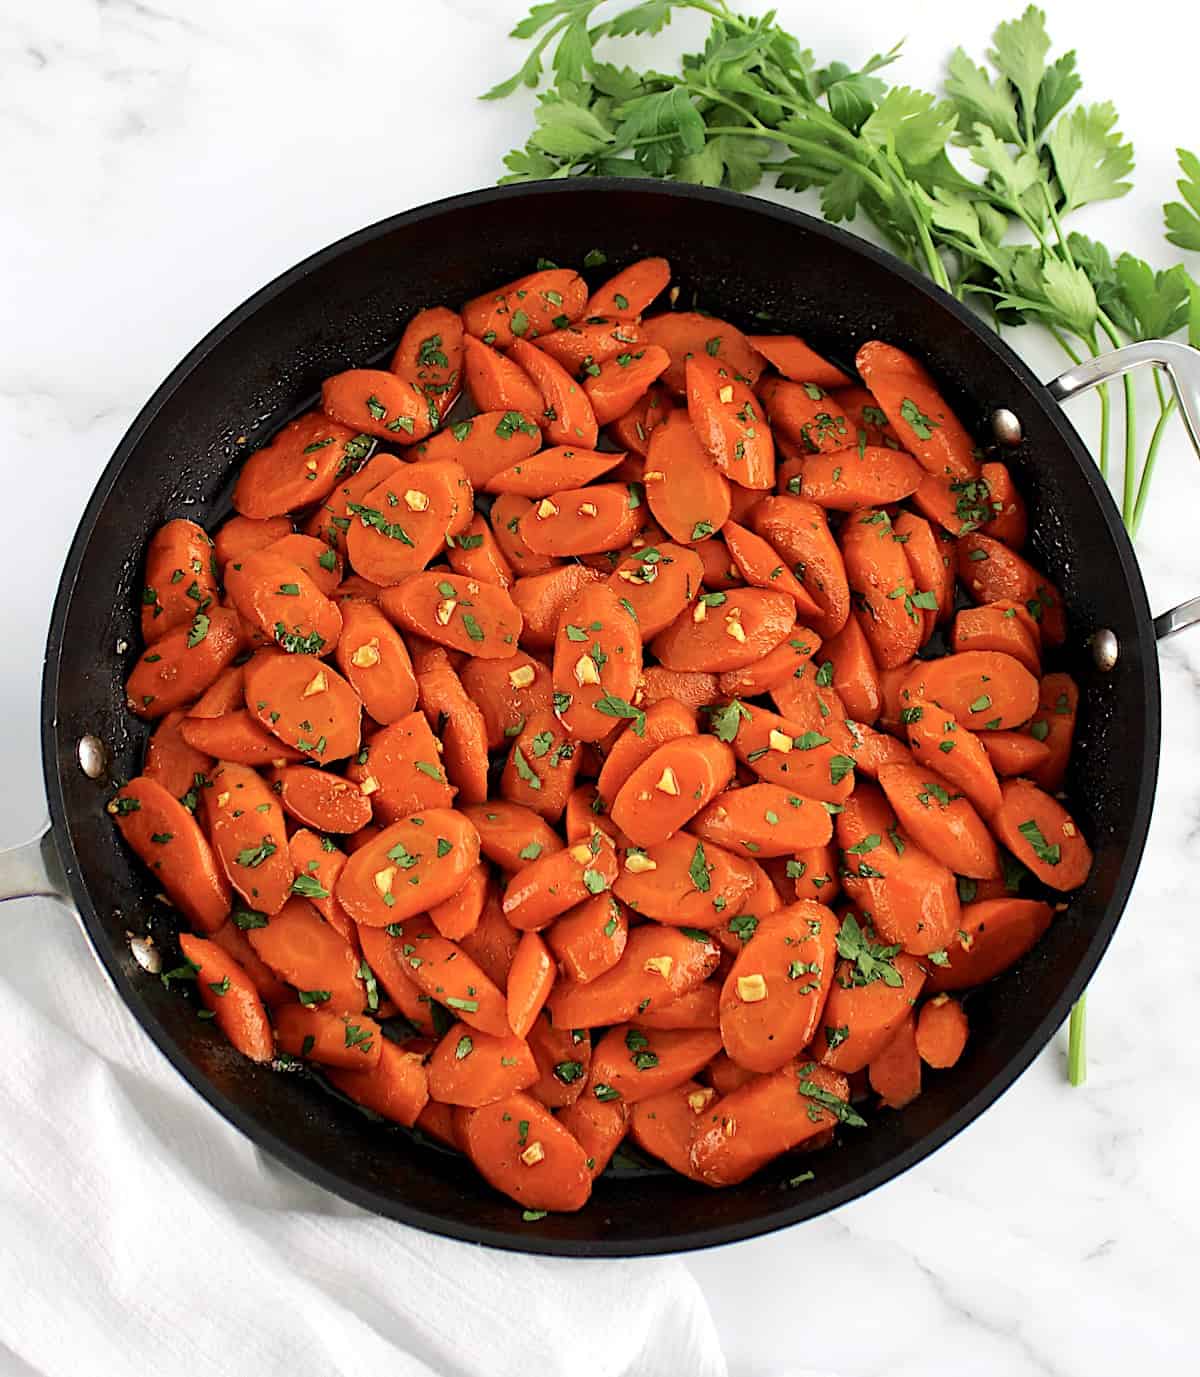 Glazed Carrots in skillet with chopped parsley on top